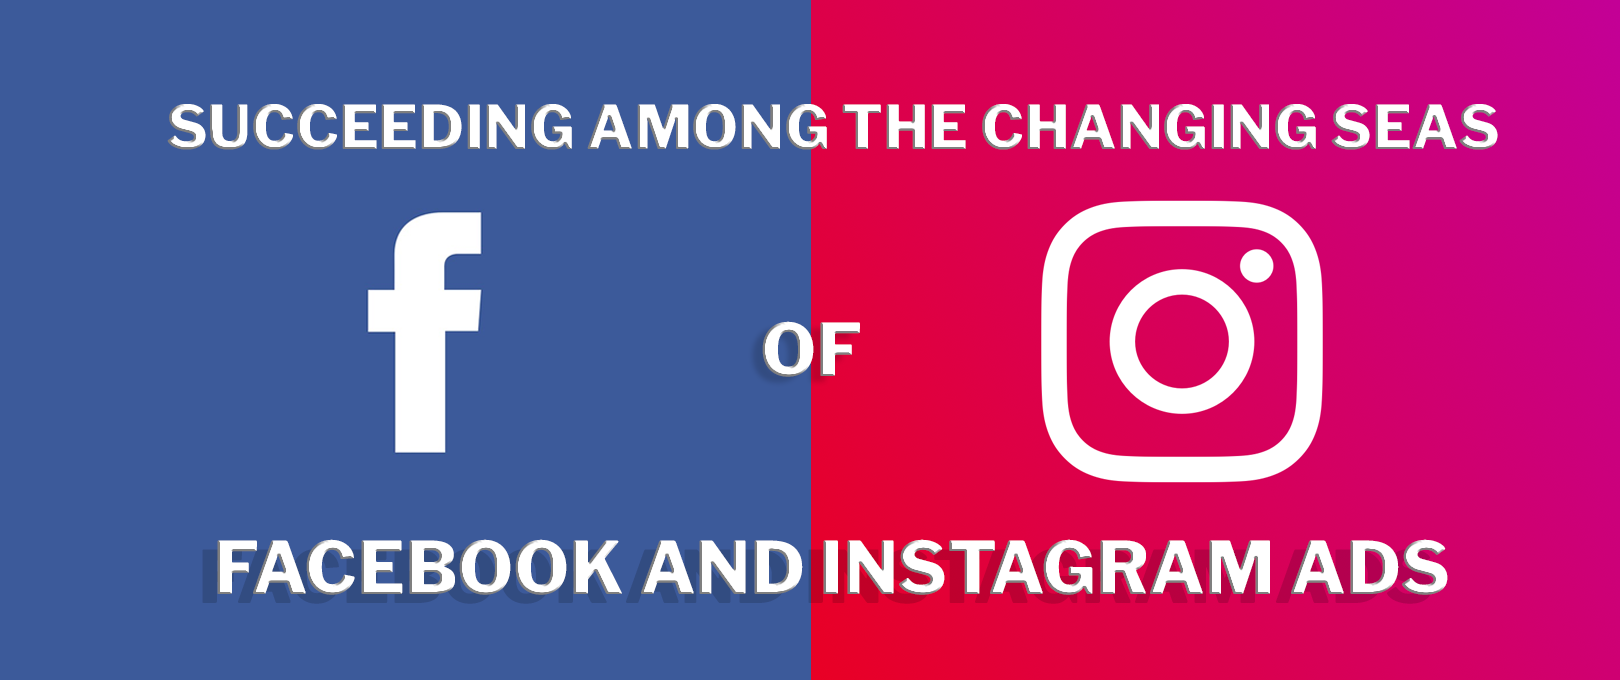 Succeeding-Among-the-Changing-Seas-of-Facebook-and-Instagram-Ads